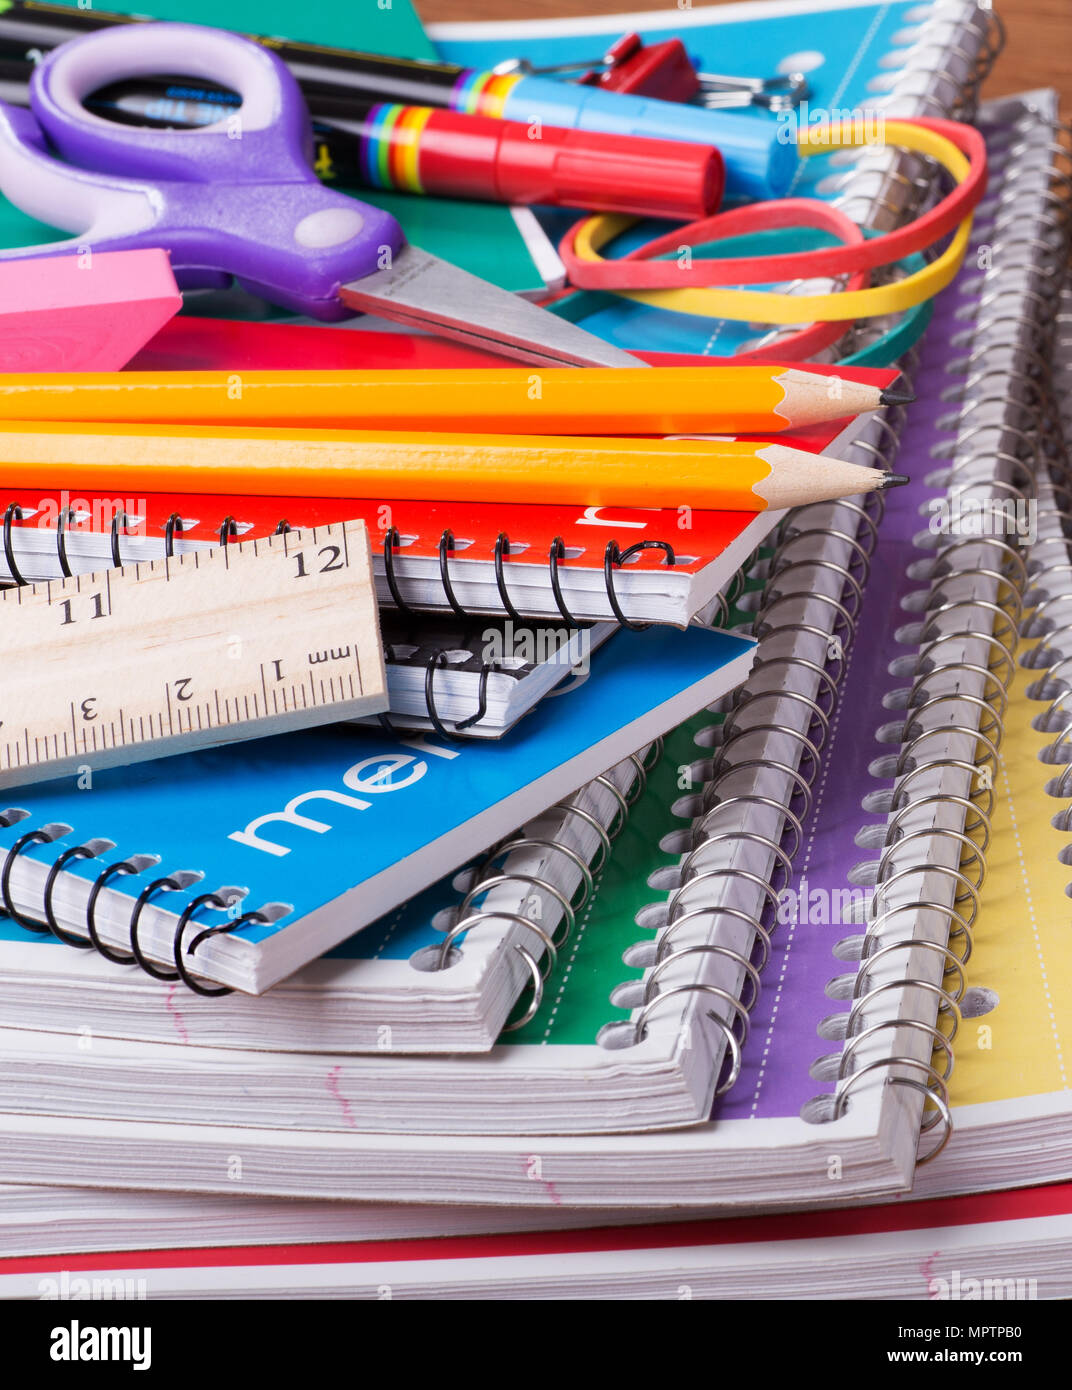 Closeup of an assortment of school supplies on top of a stack of spiral notebooks Stock Photo